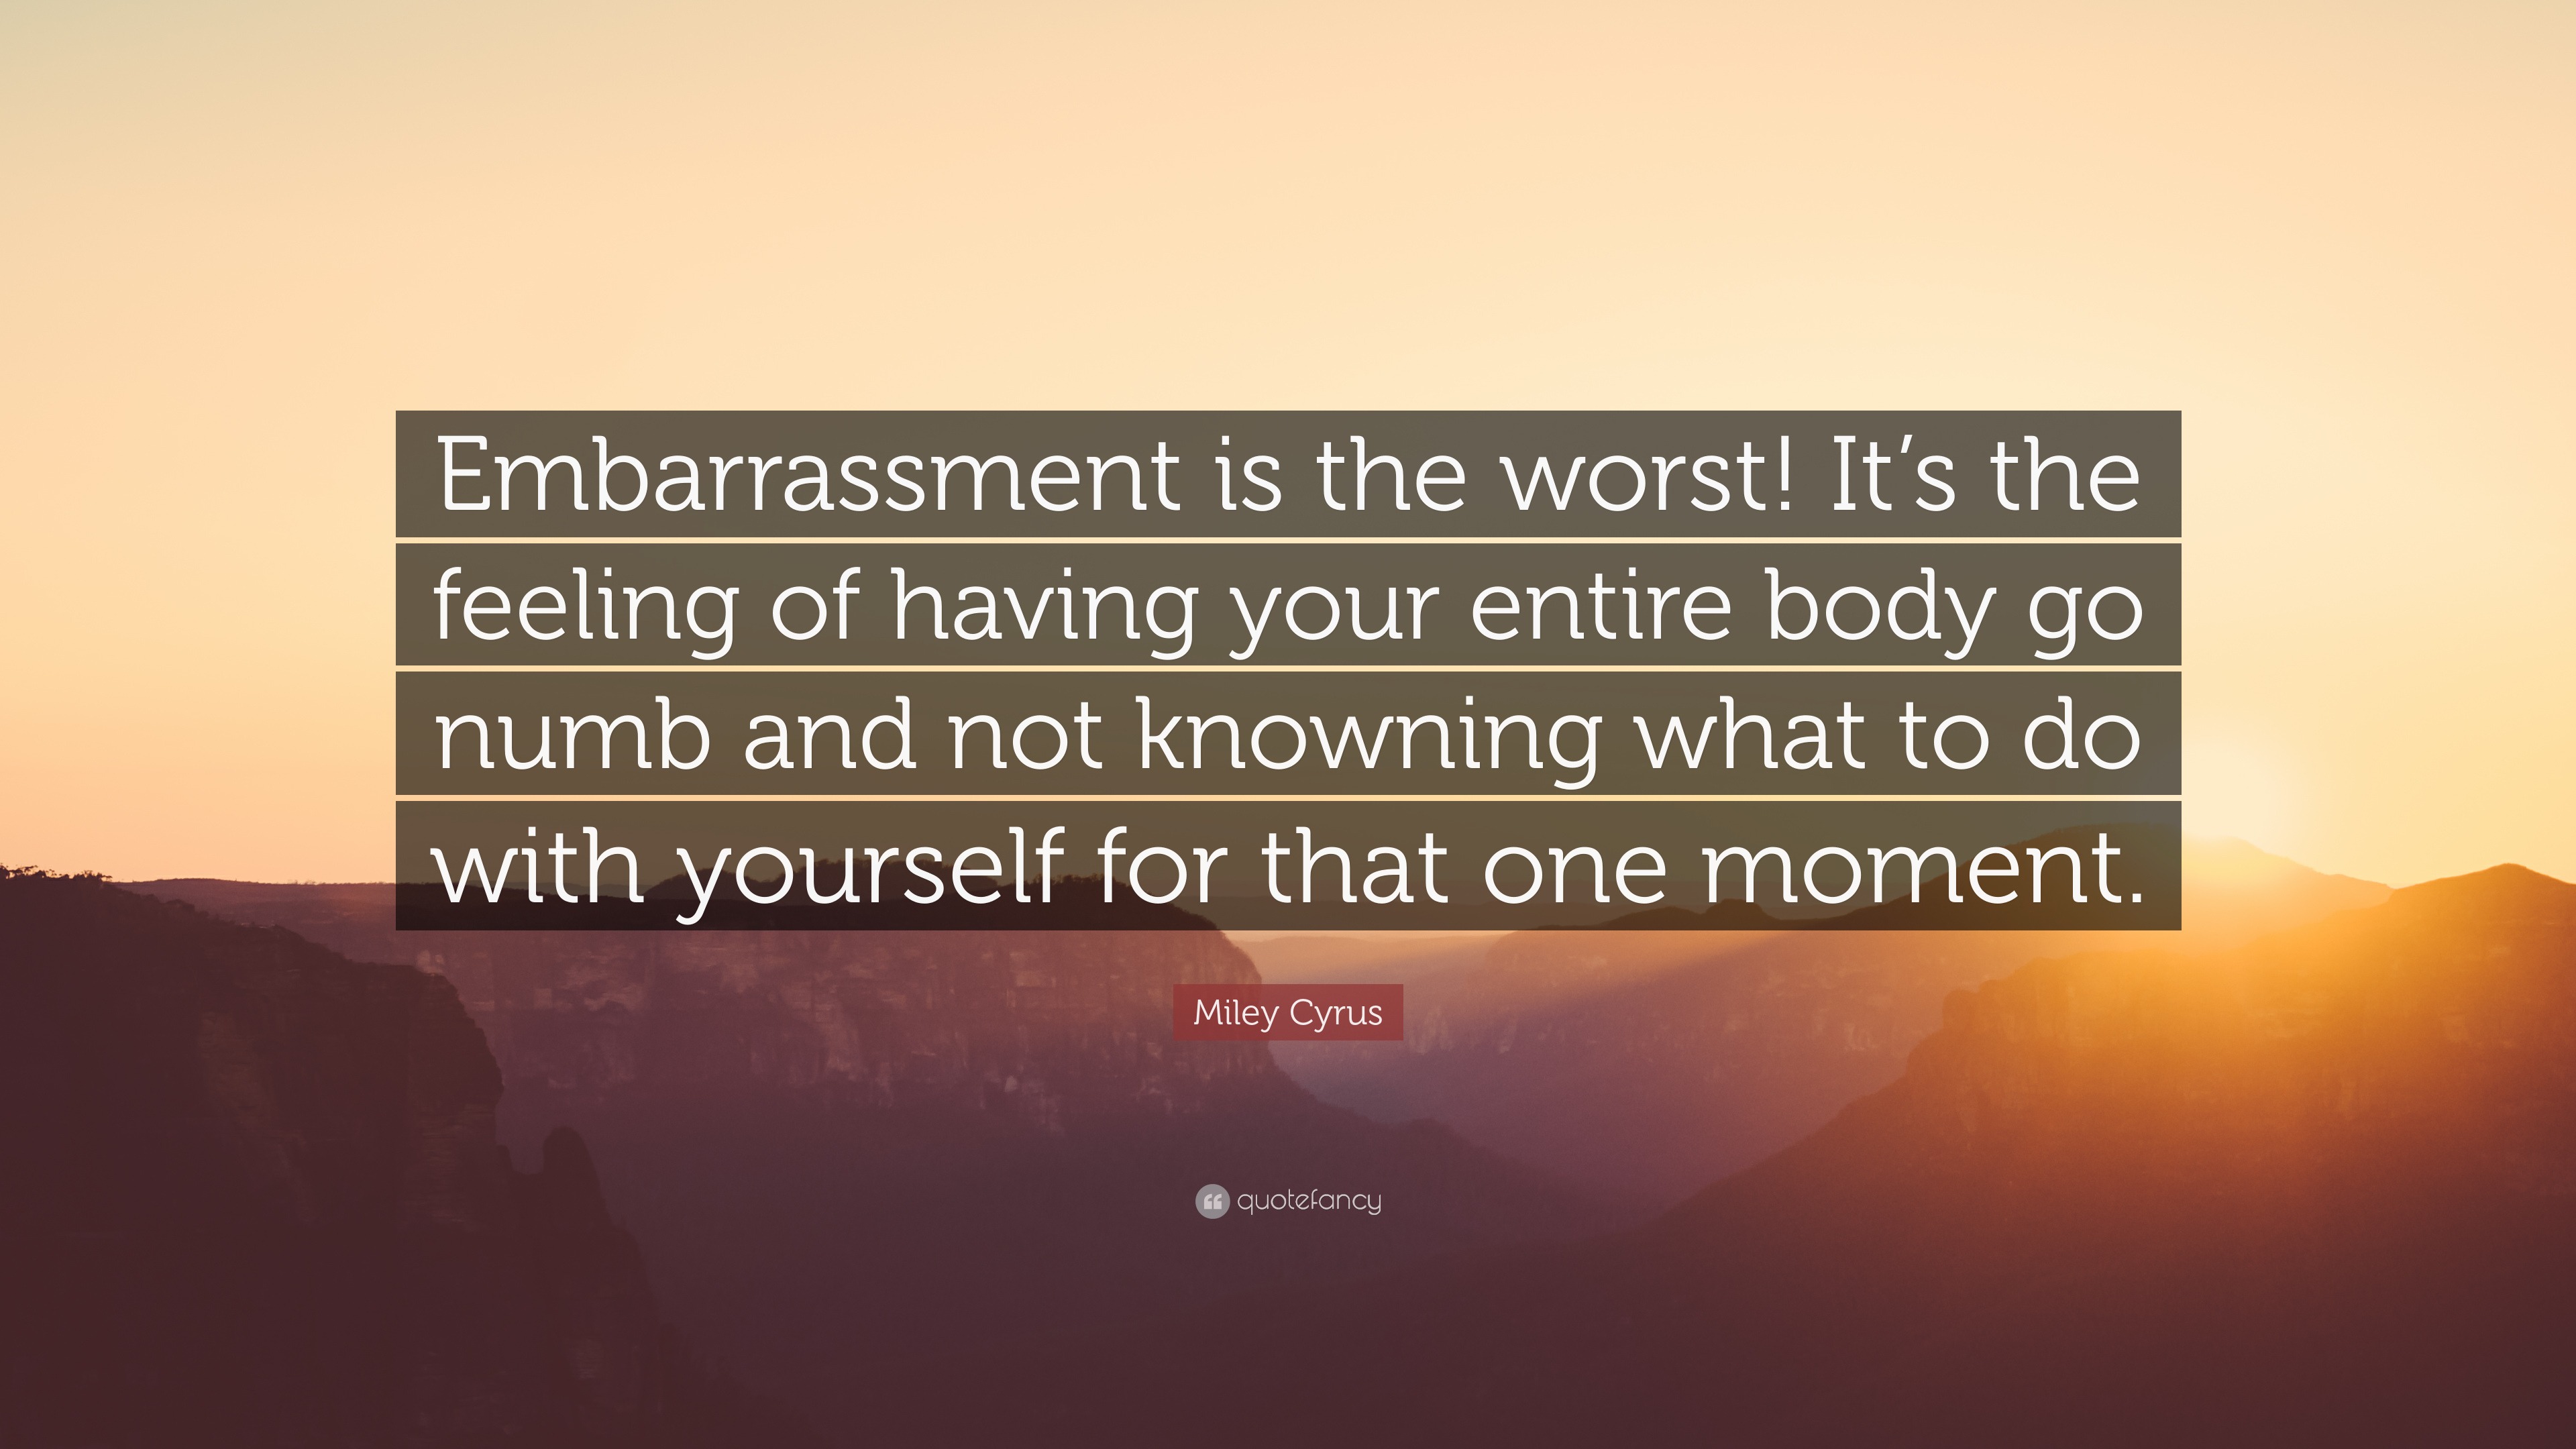 Miley Cyrus Quote: “Embarrassment is the worst! It’s the feeling of